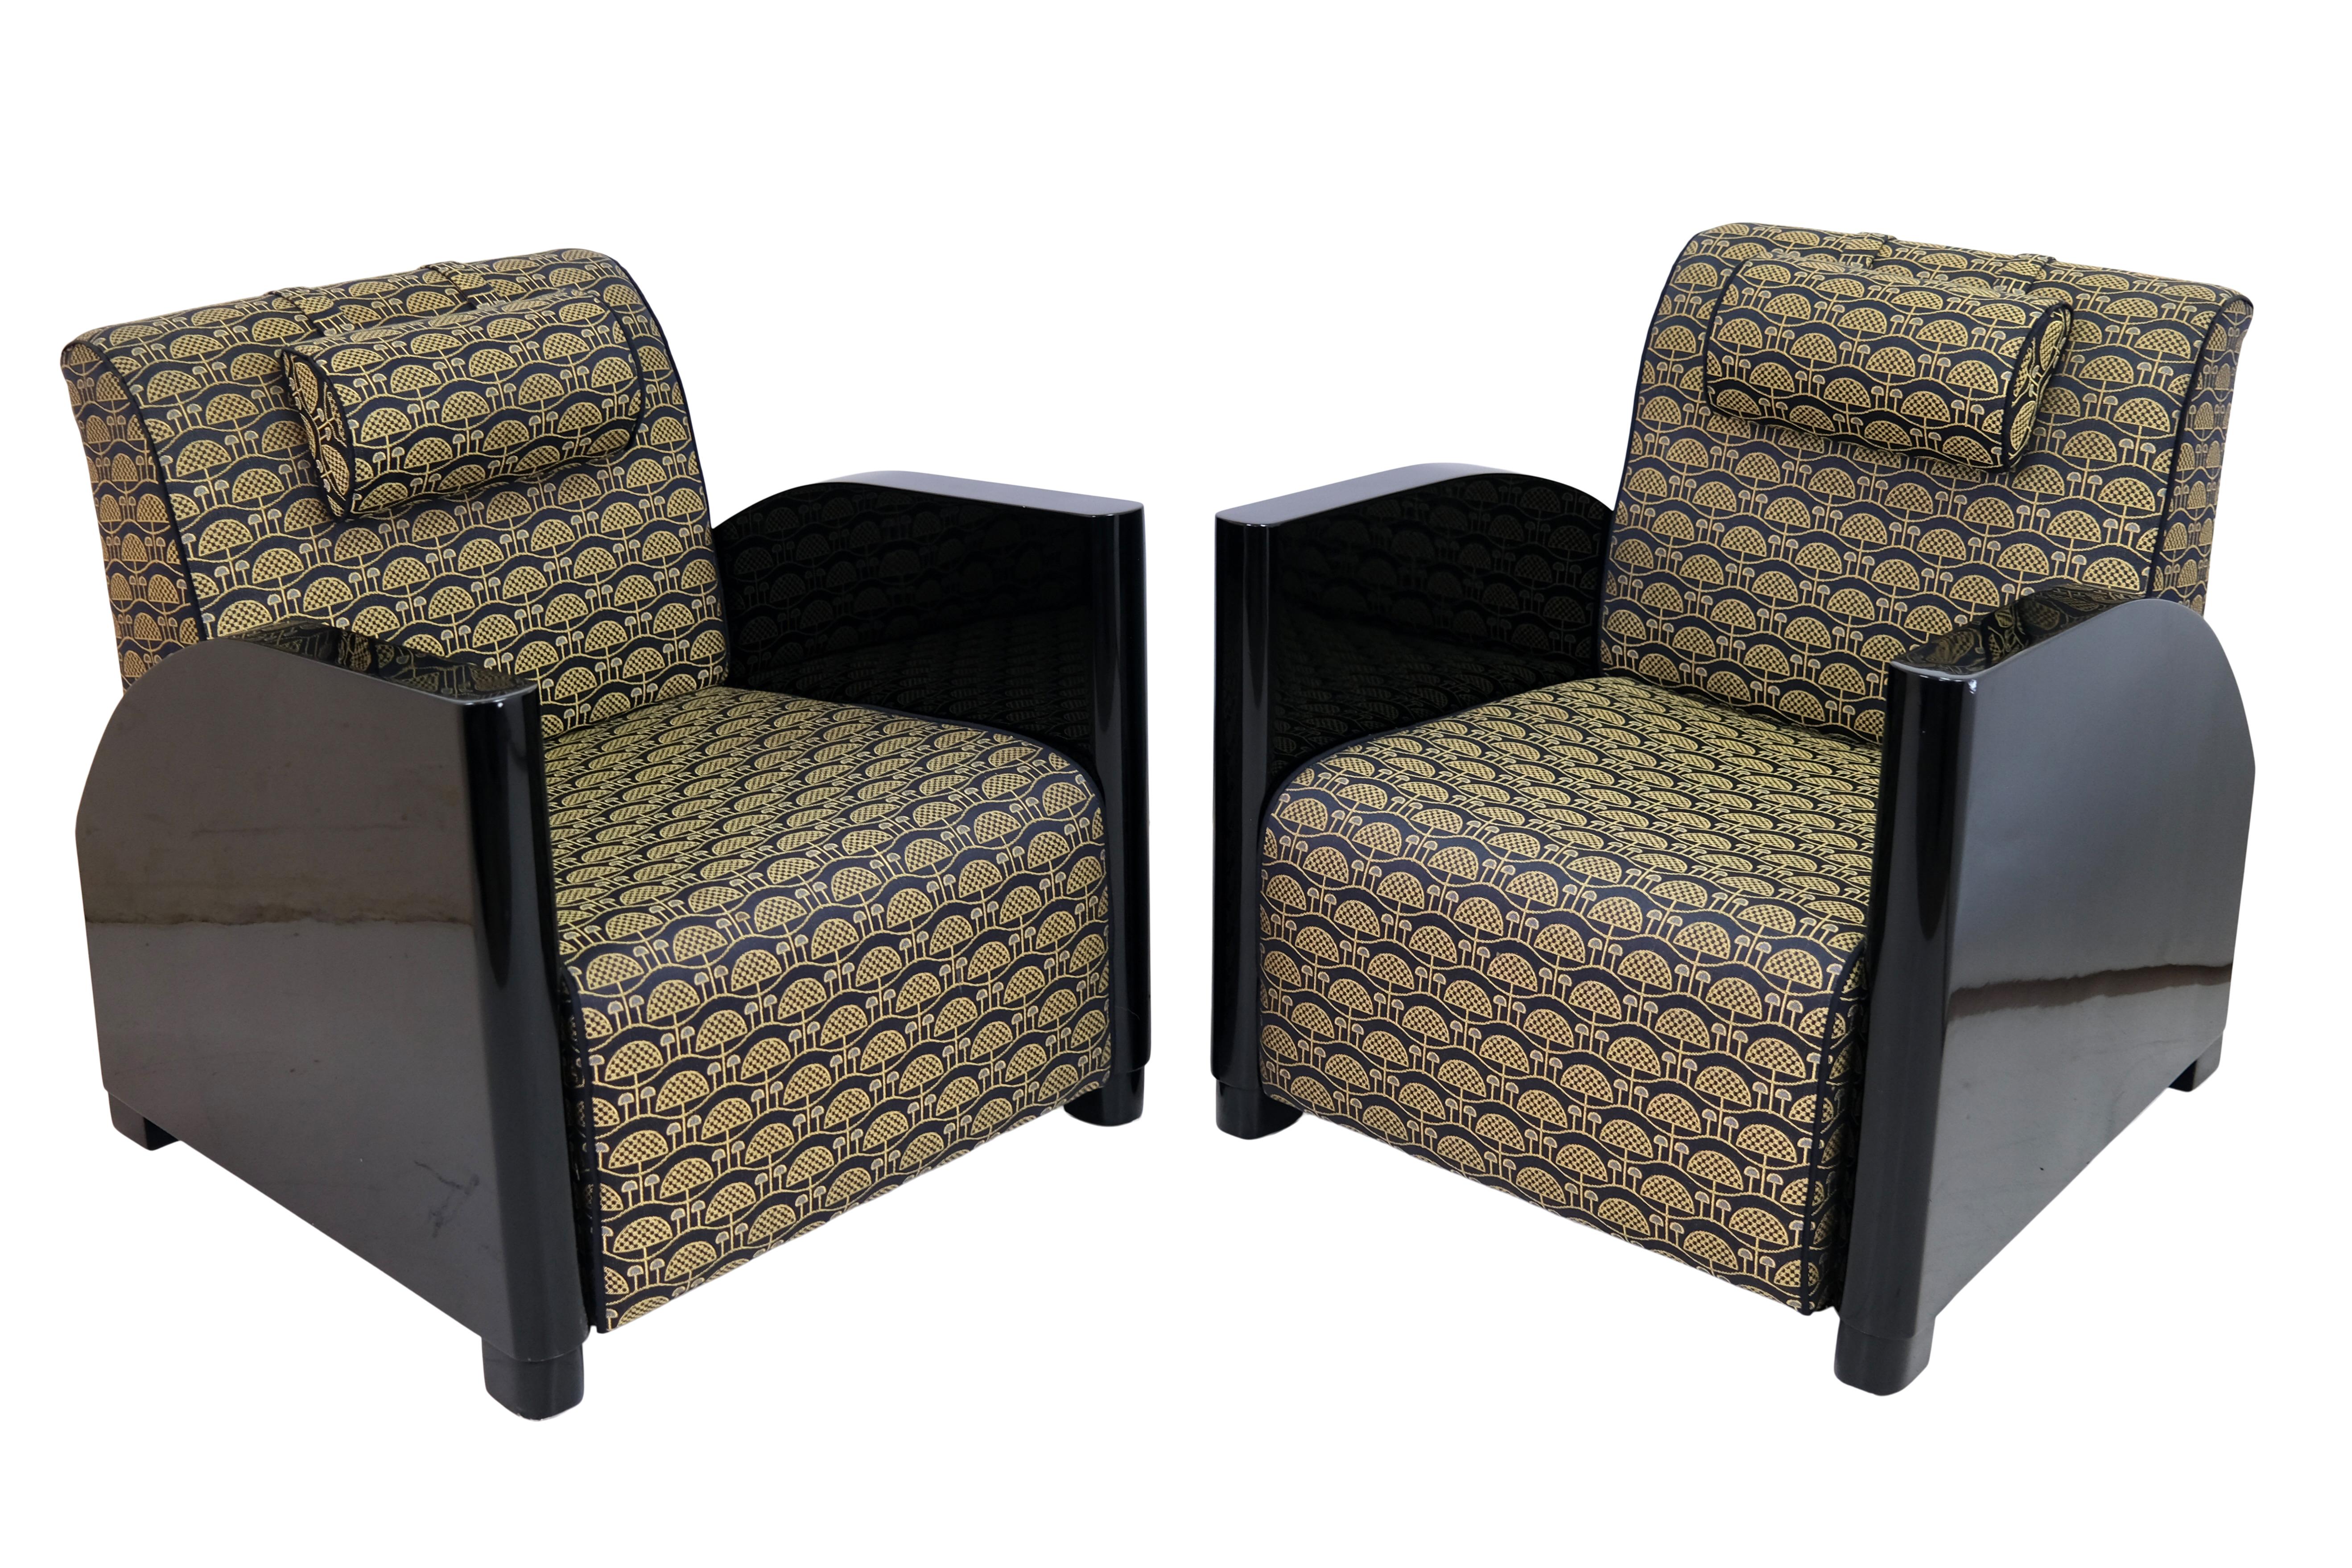 Pair of armchairs
Piano lacquer, black high gloss
Golden upholstery

Original Art Deco, France 1930s

Dimensions:
Width: 77.5 cm
Height: 82 cm
Depth: 77,5 cm
Seat height: 40 cm